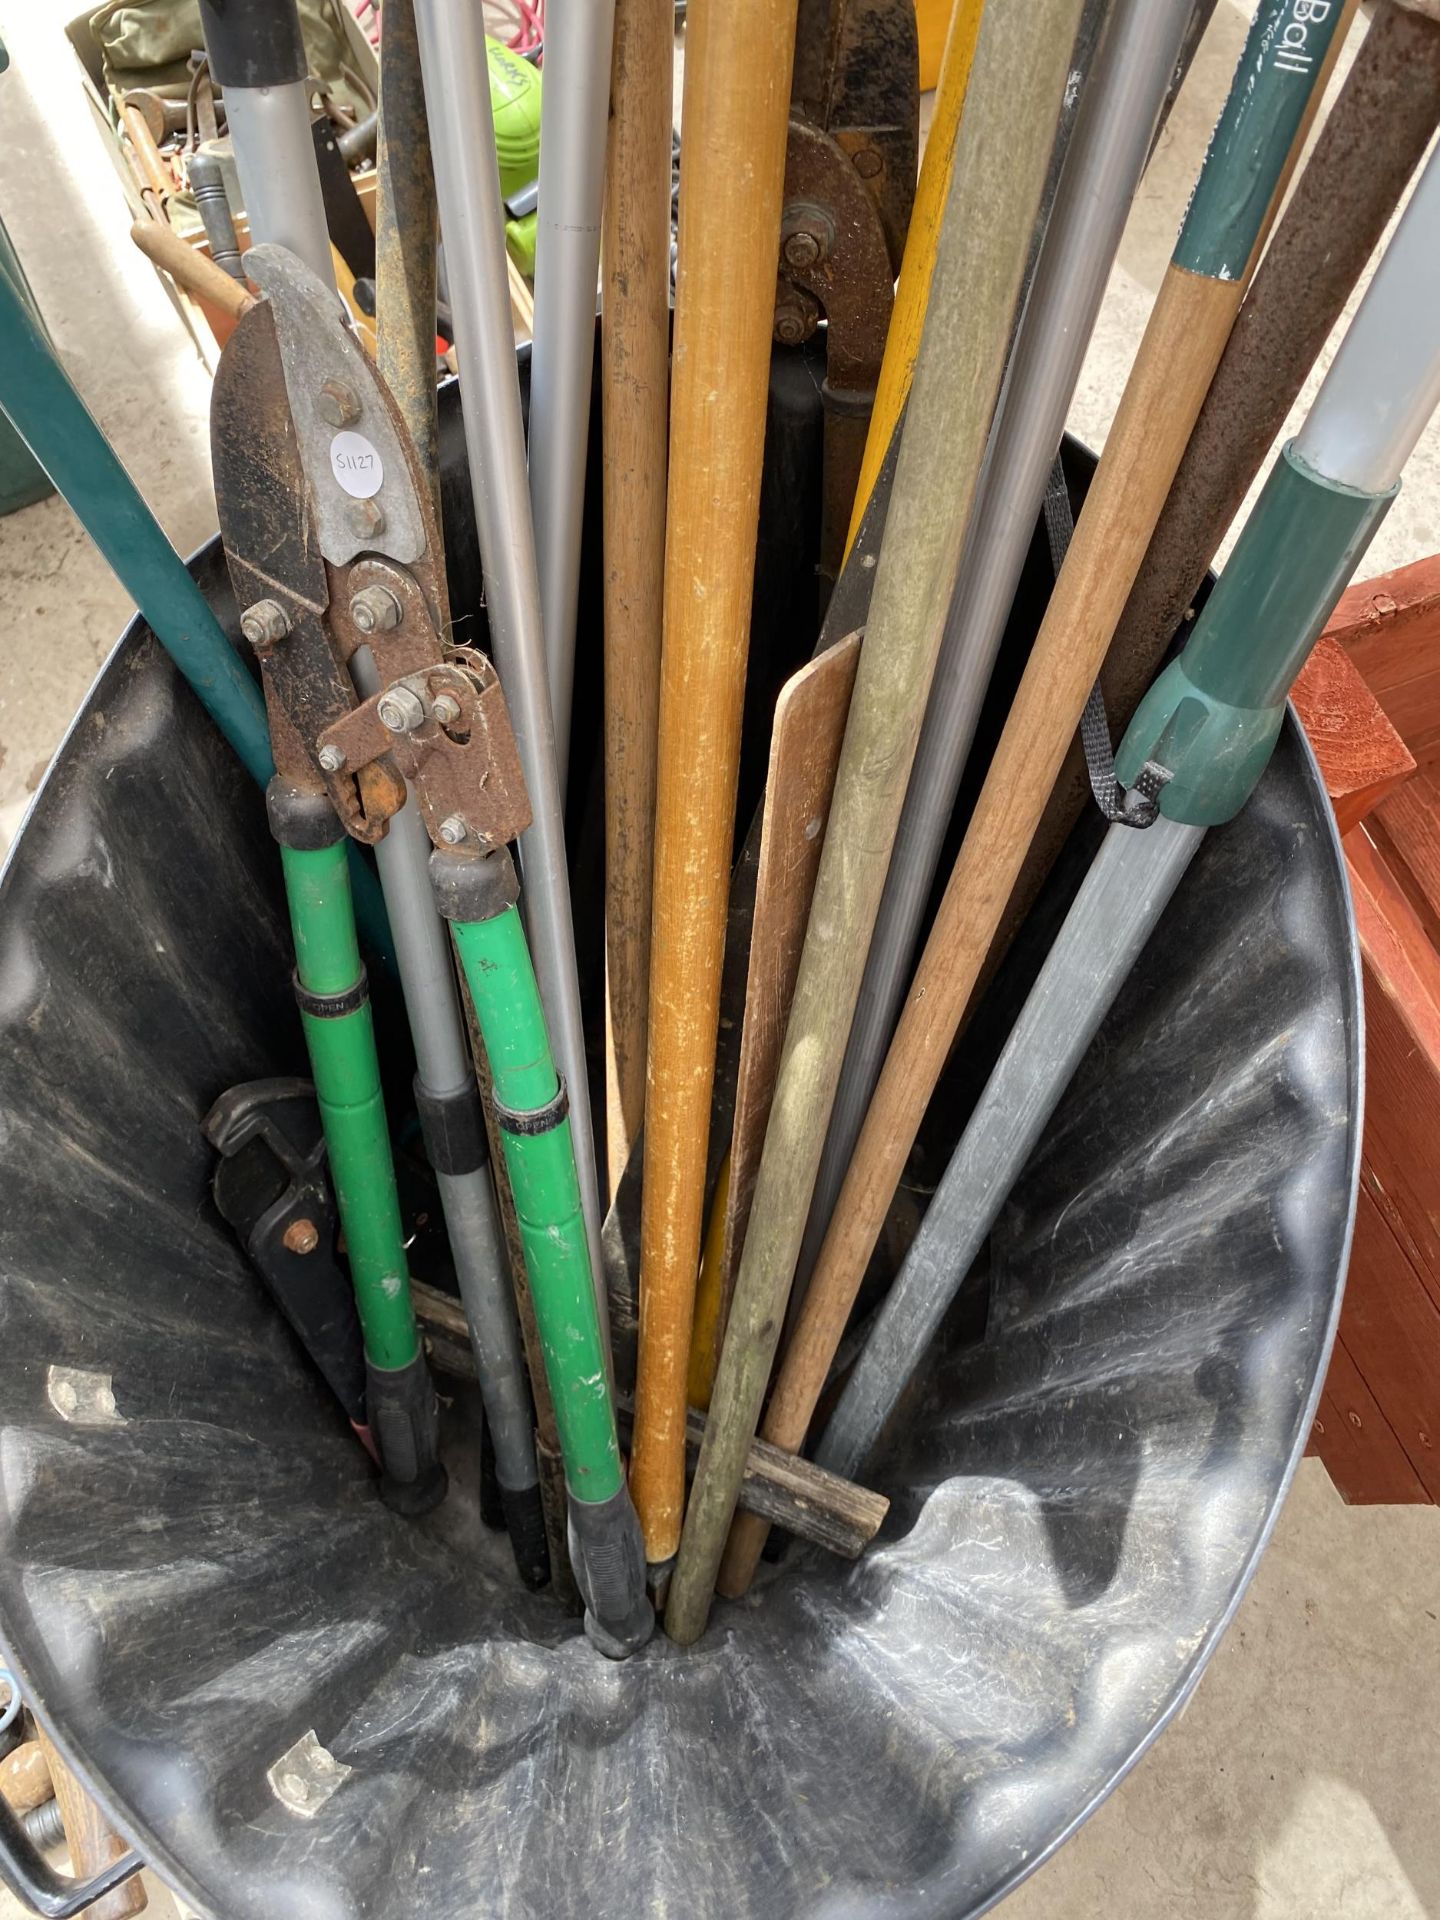 A PLASTIC DUST BIN CONTAINING AN ASSORTMENT OF GARDEN TOOLS TO INCLUDE BRUSHES, RAKES AND LOPPERS - Image 3 of 3